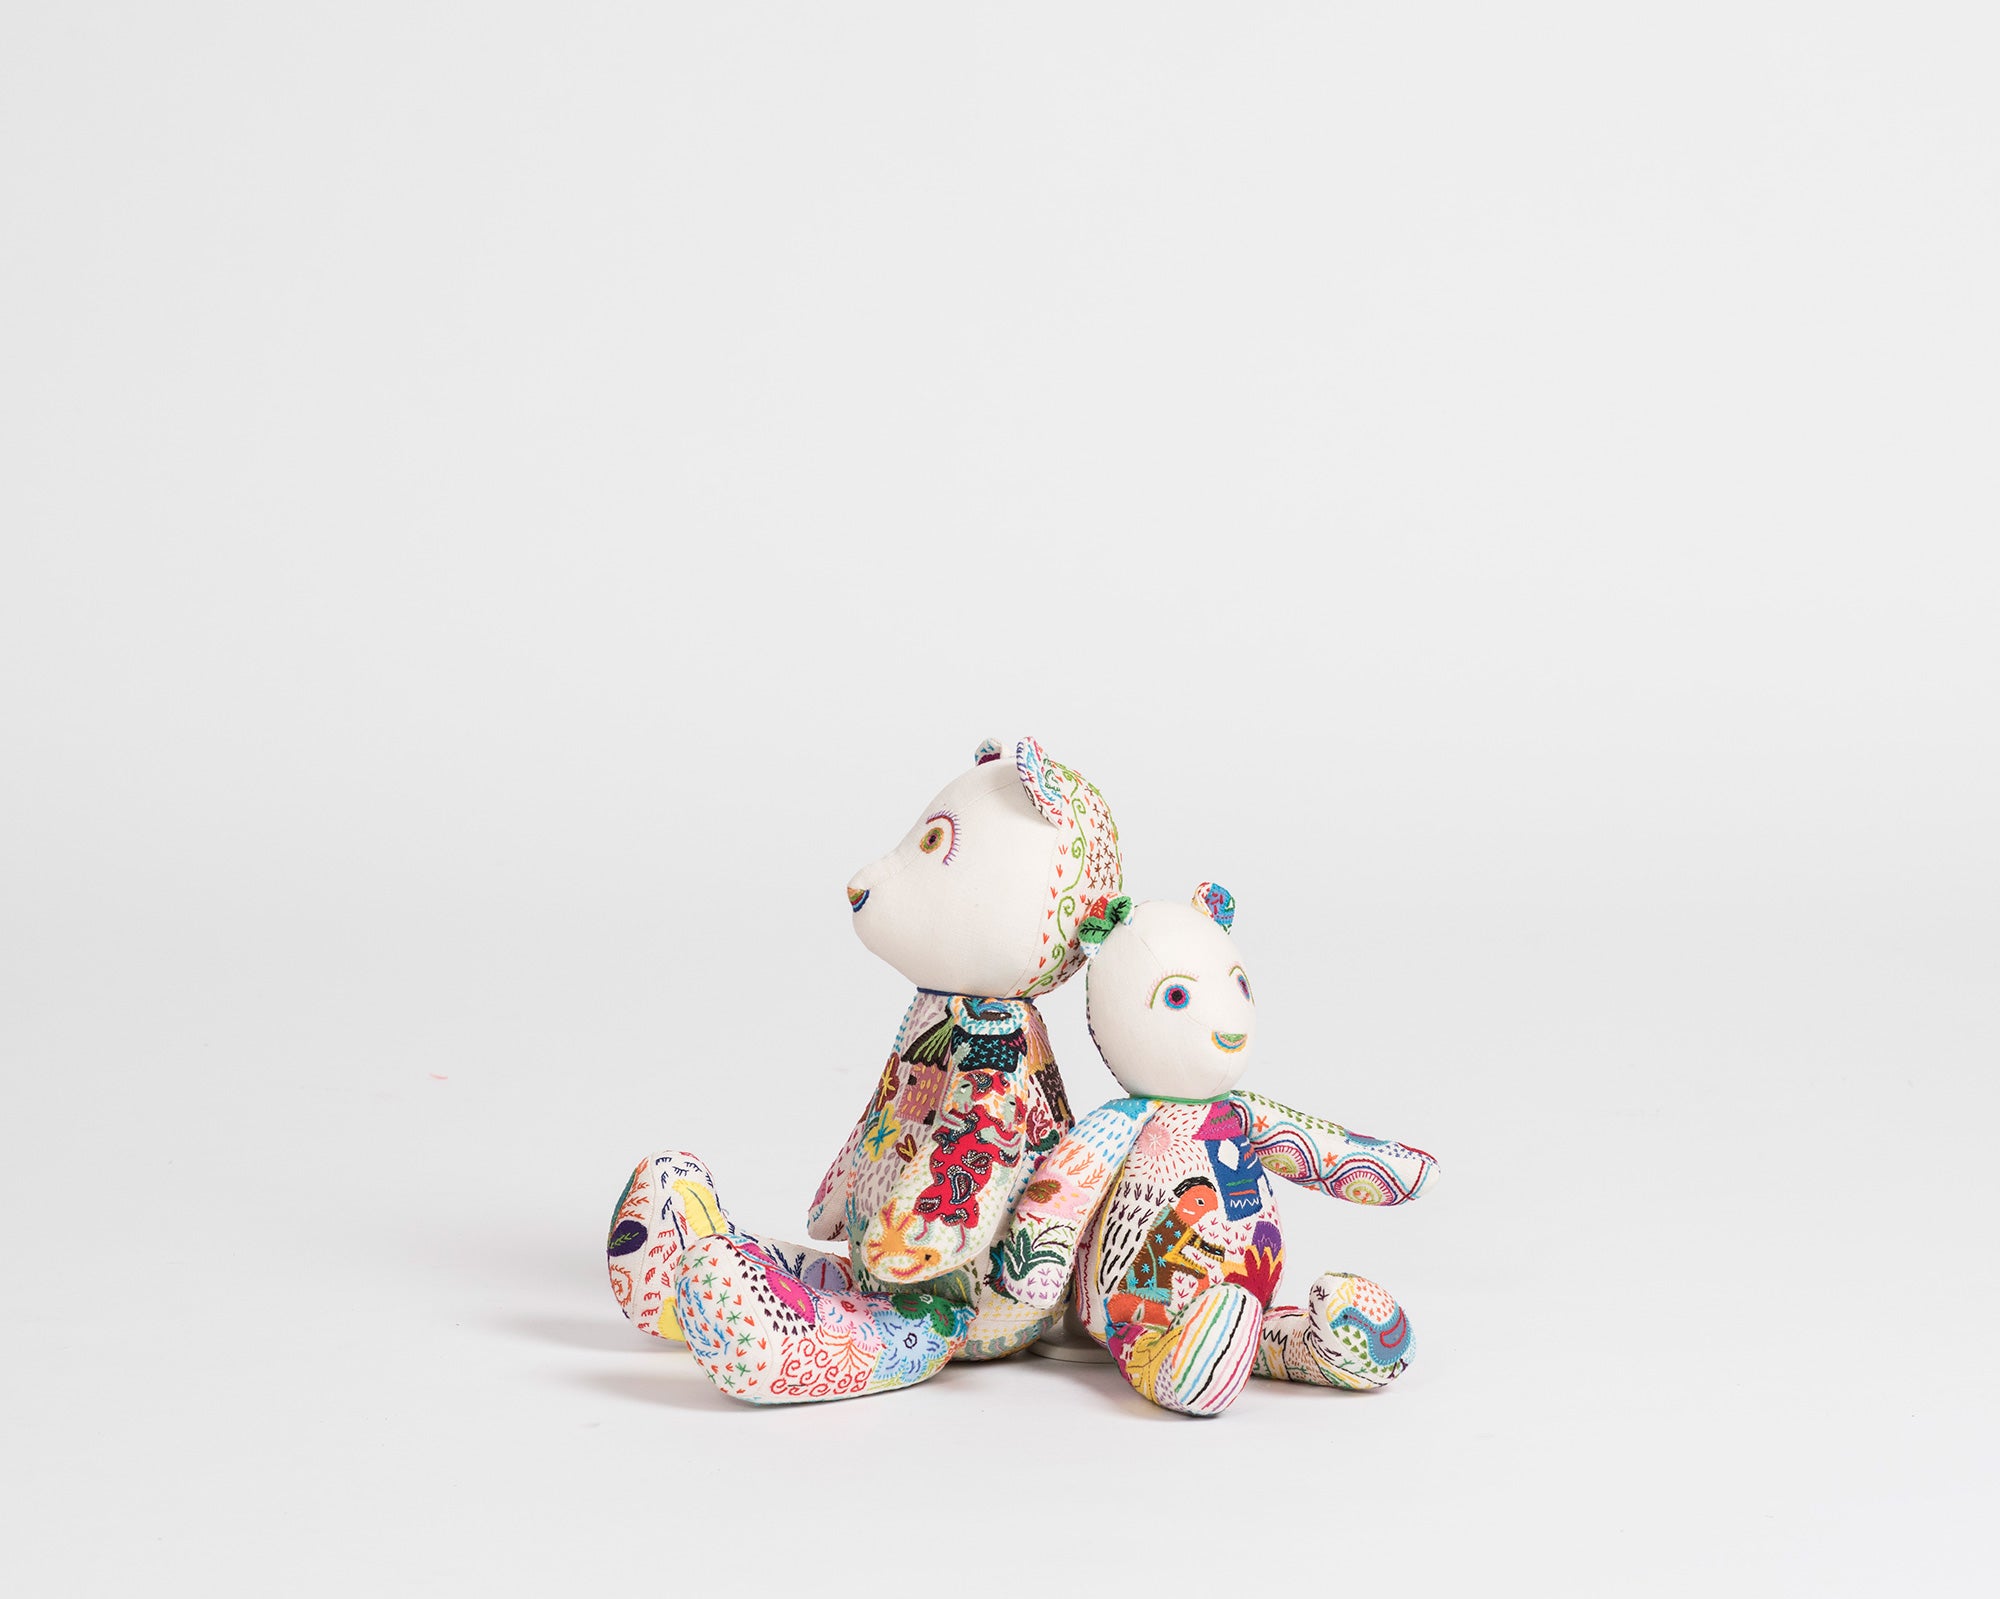 Maggie Project Bear - White